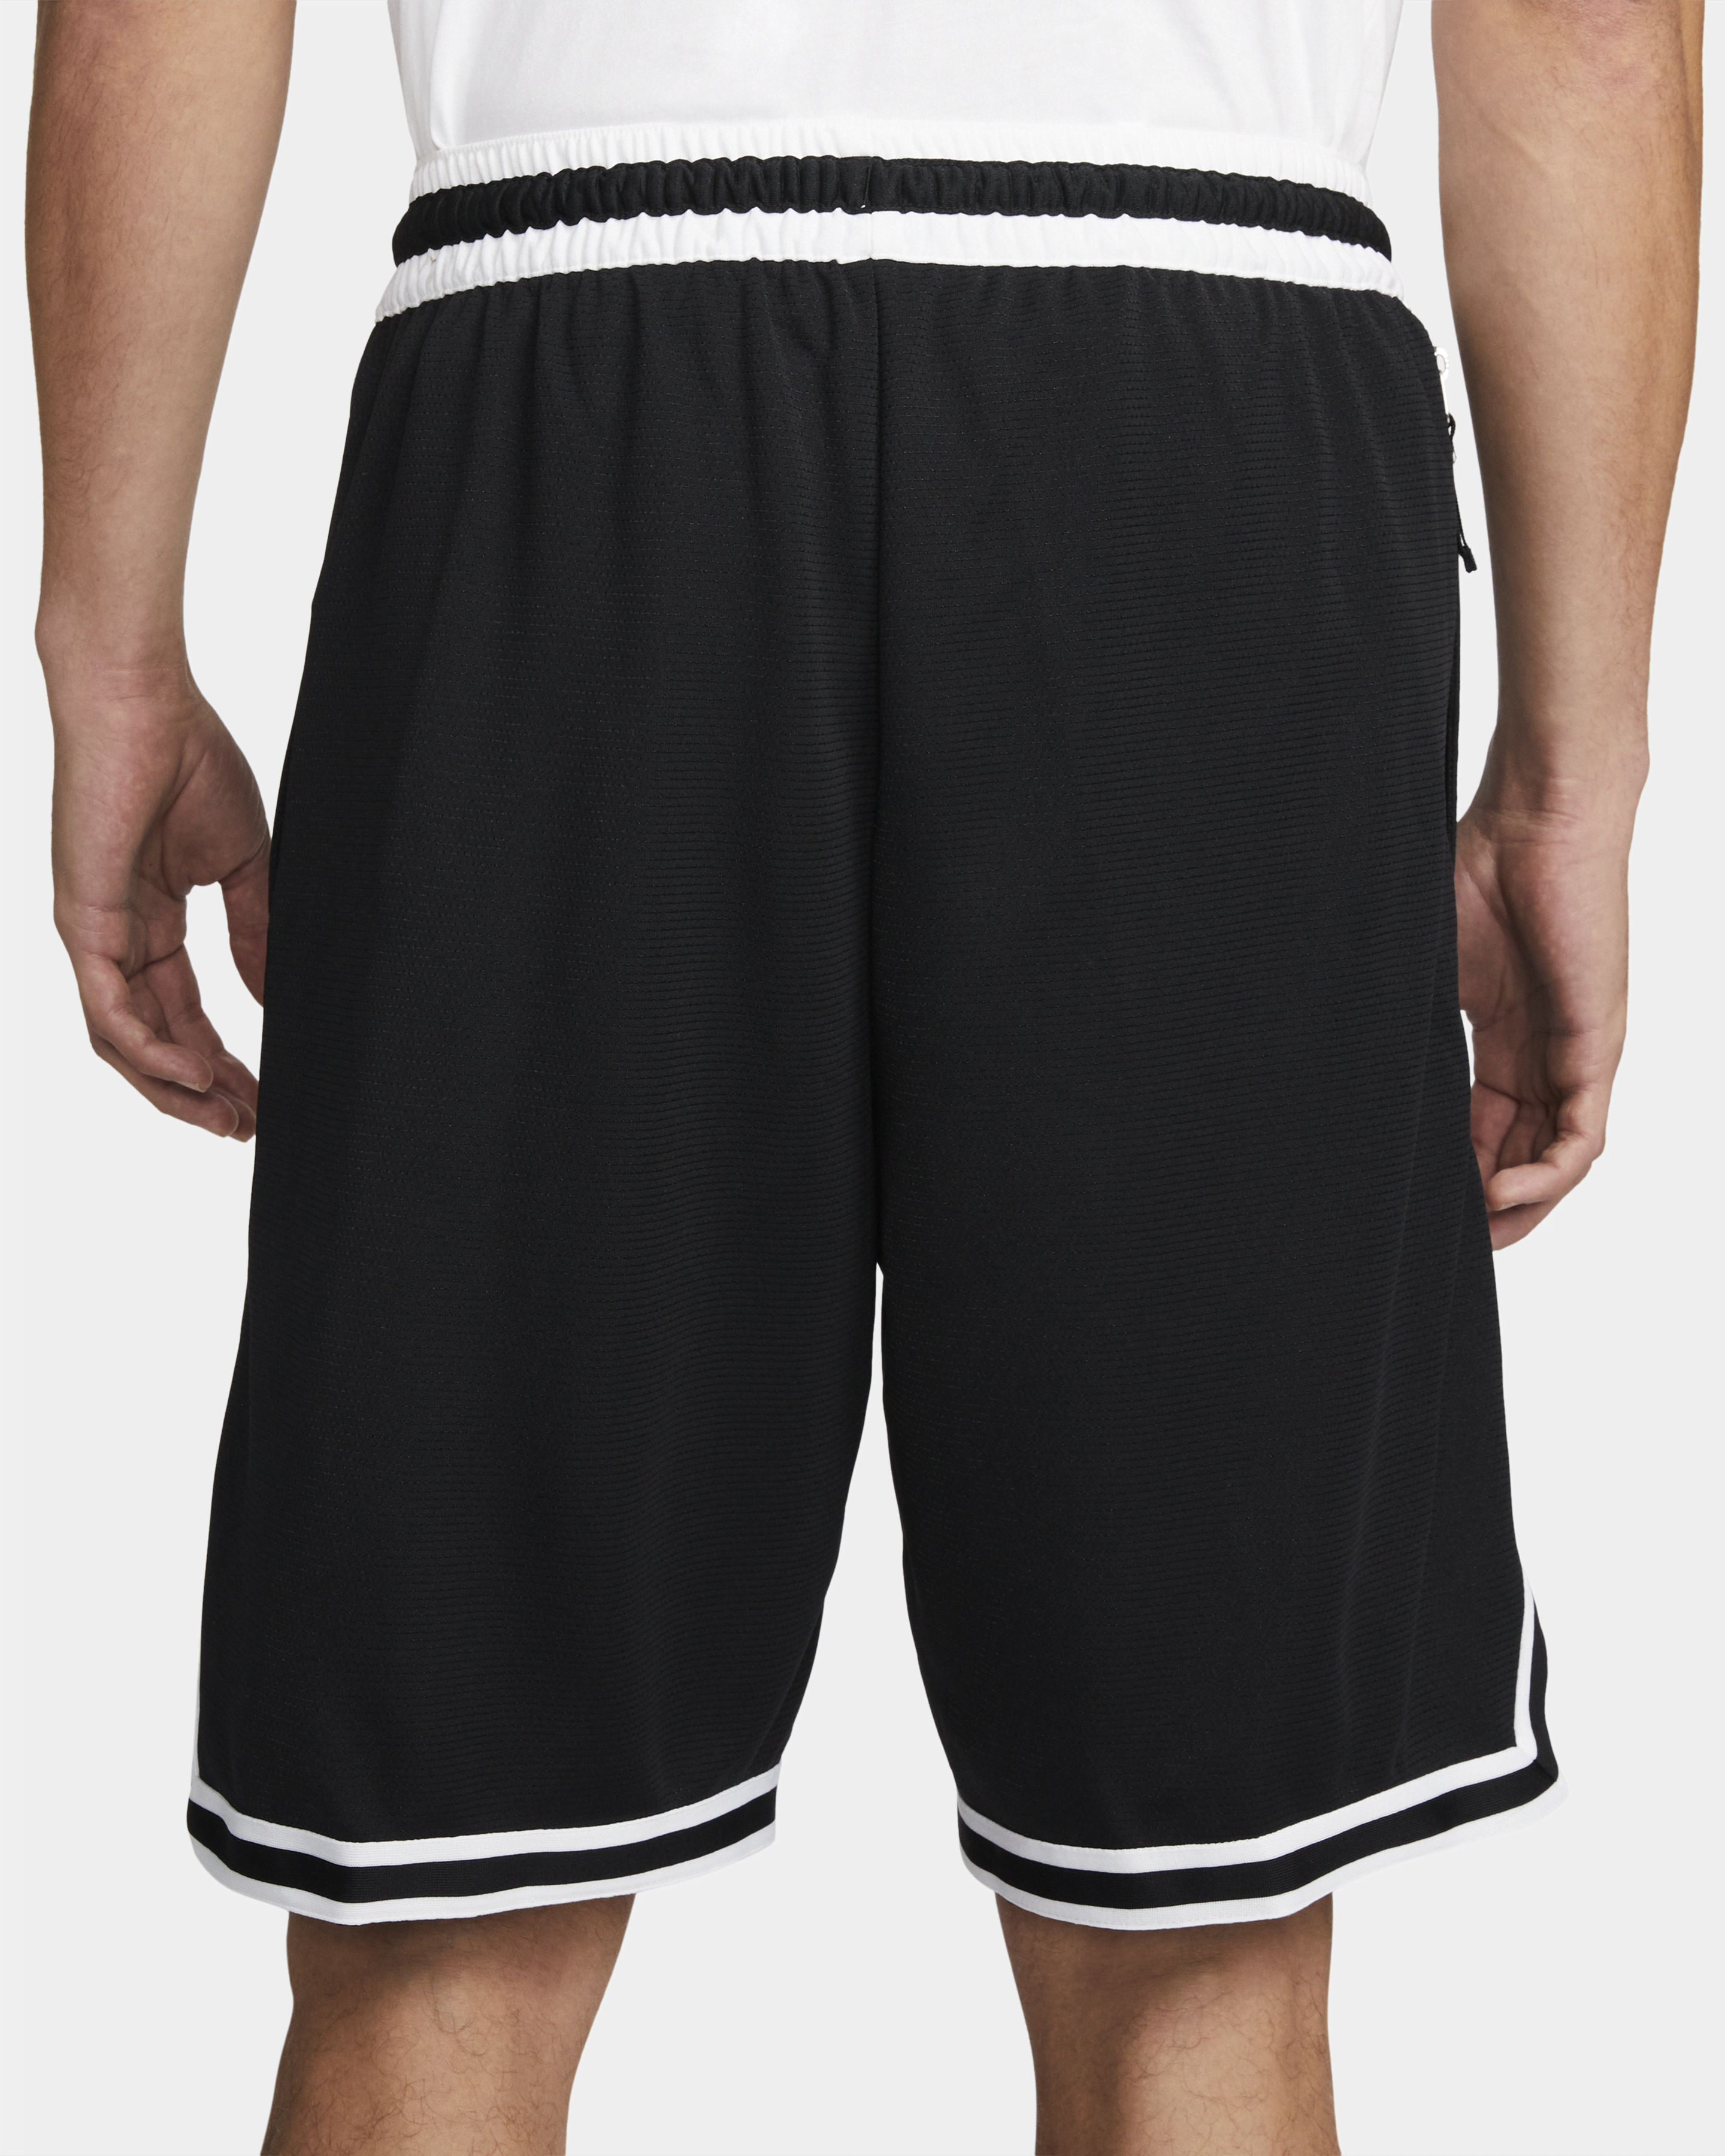 Athletic And Comfortable Vintage Basketball Shorts For Sale